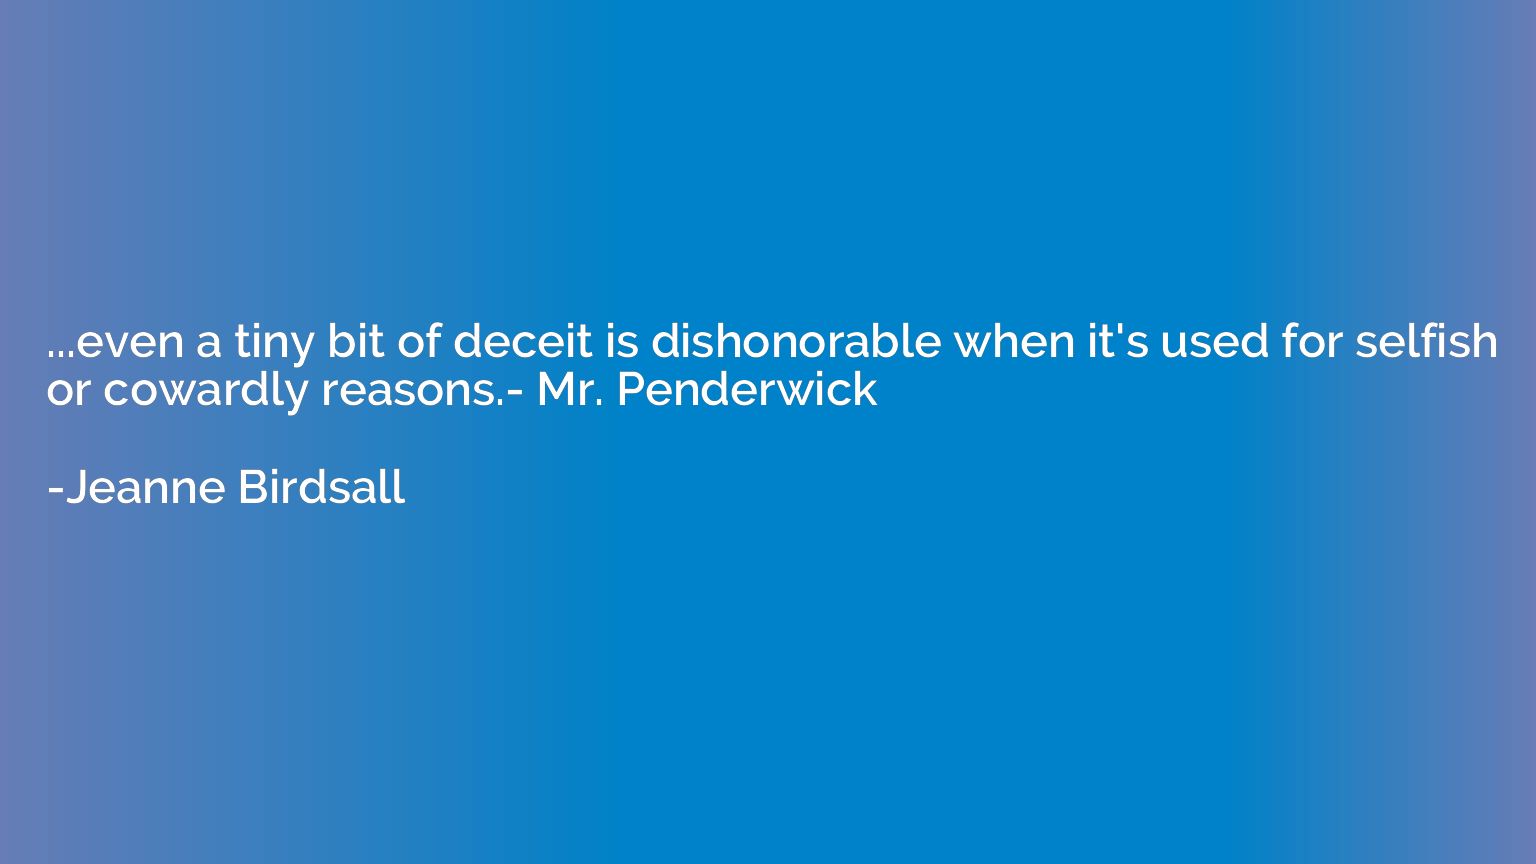 ...even a tiny bit of deceit is dishonorable when it's used 